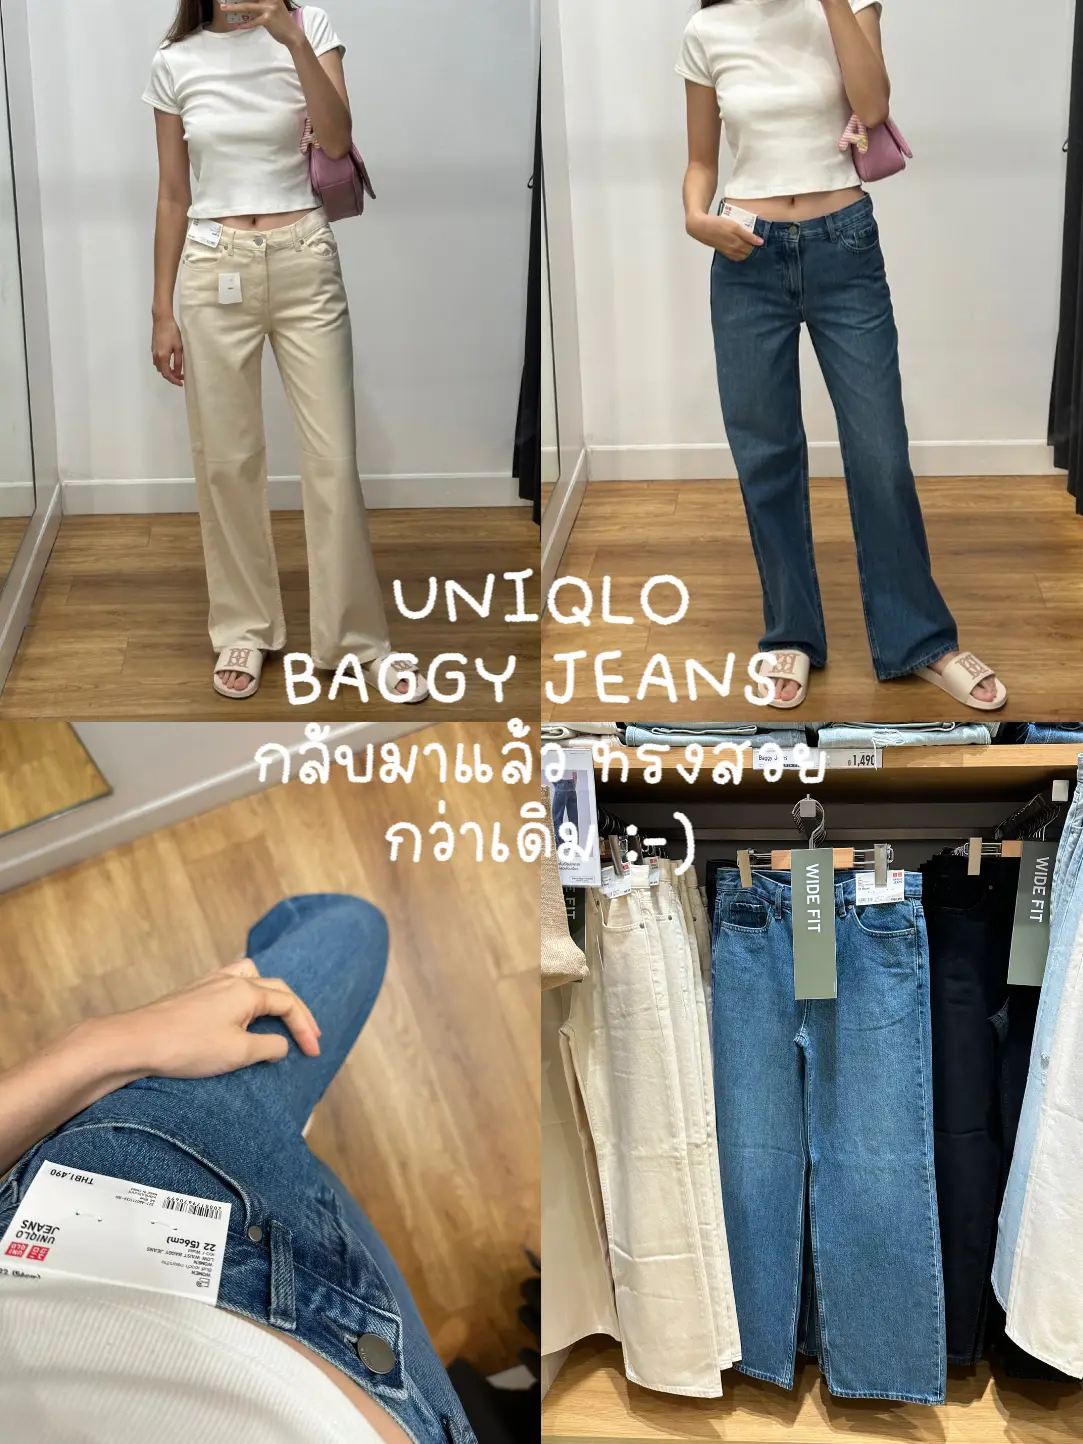 UNIQLOBAGGY JEANS is back, more beautiful than ever: -) | Gallery ...